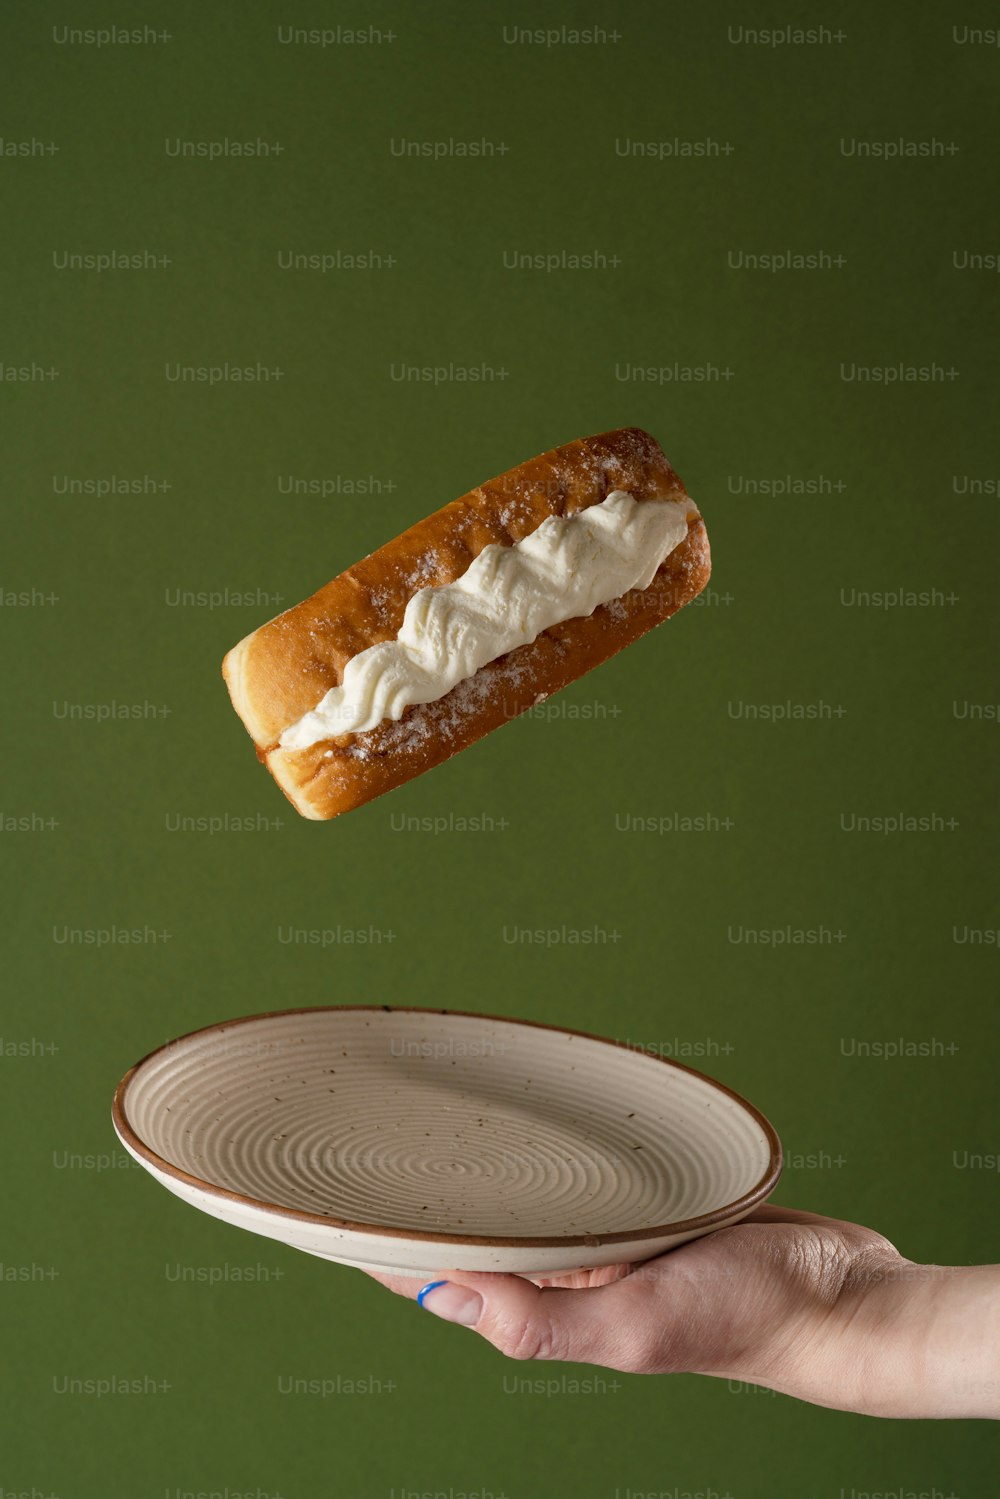 a person holding a plate with a hot dog on it